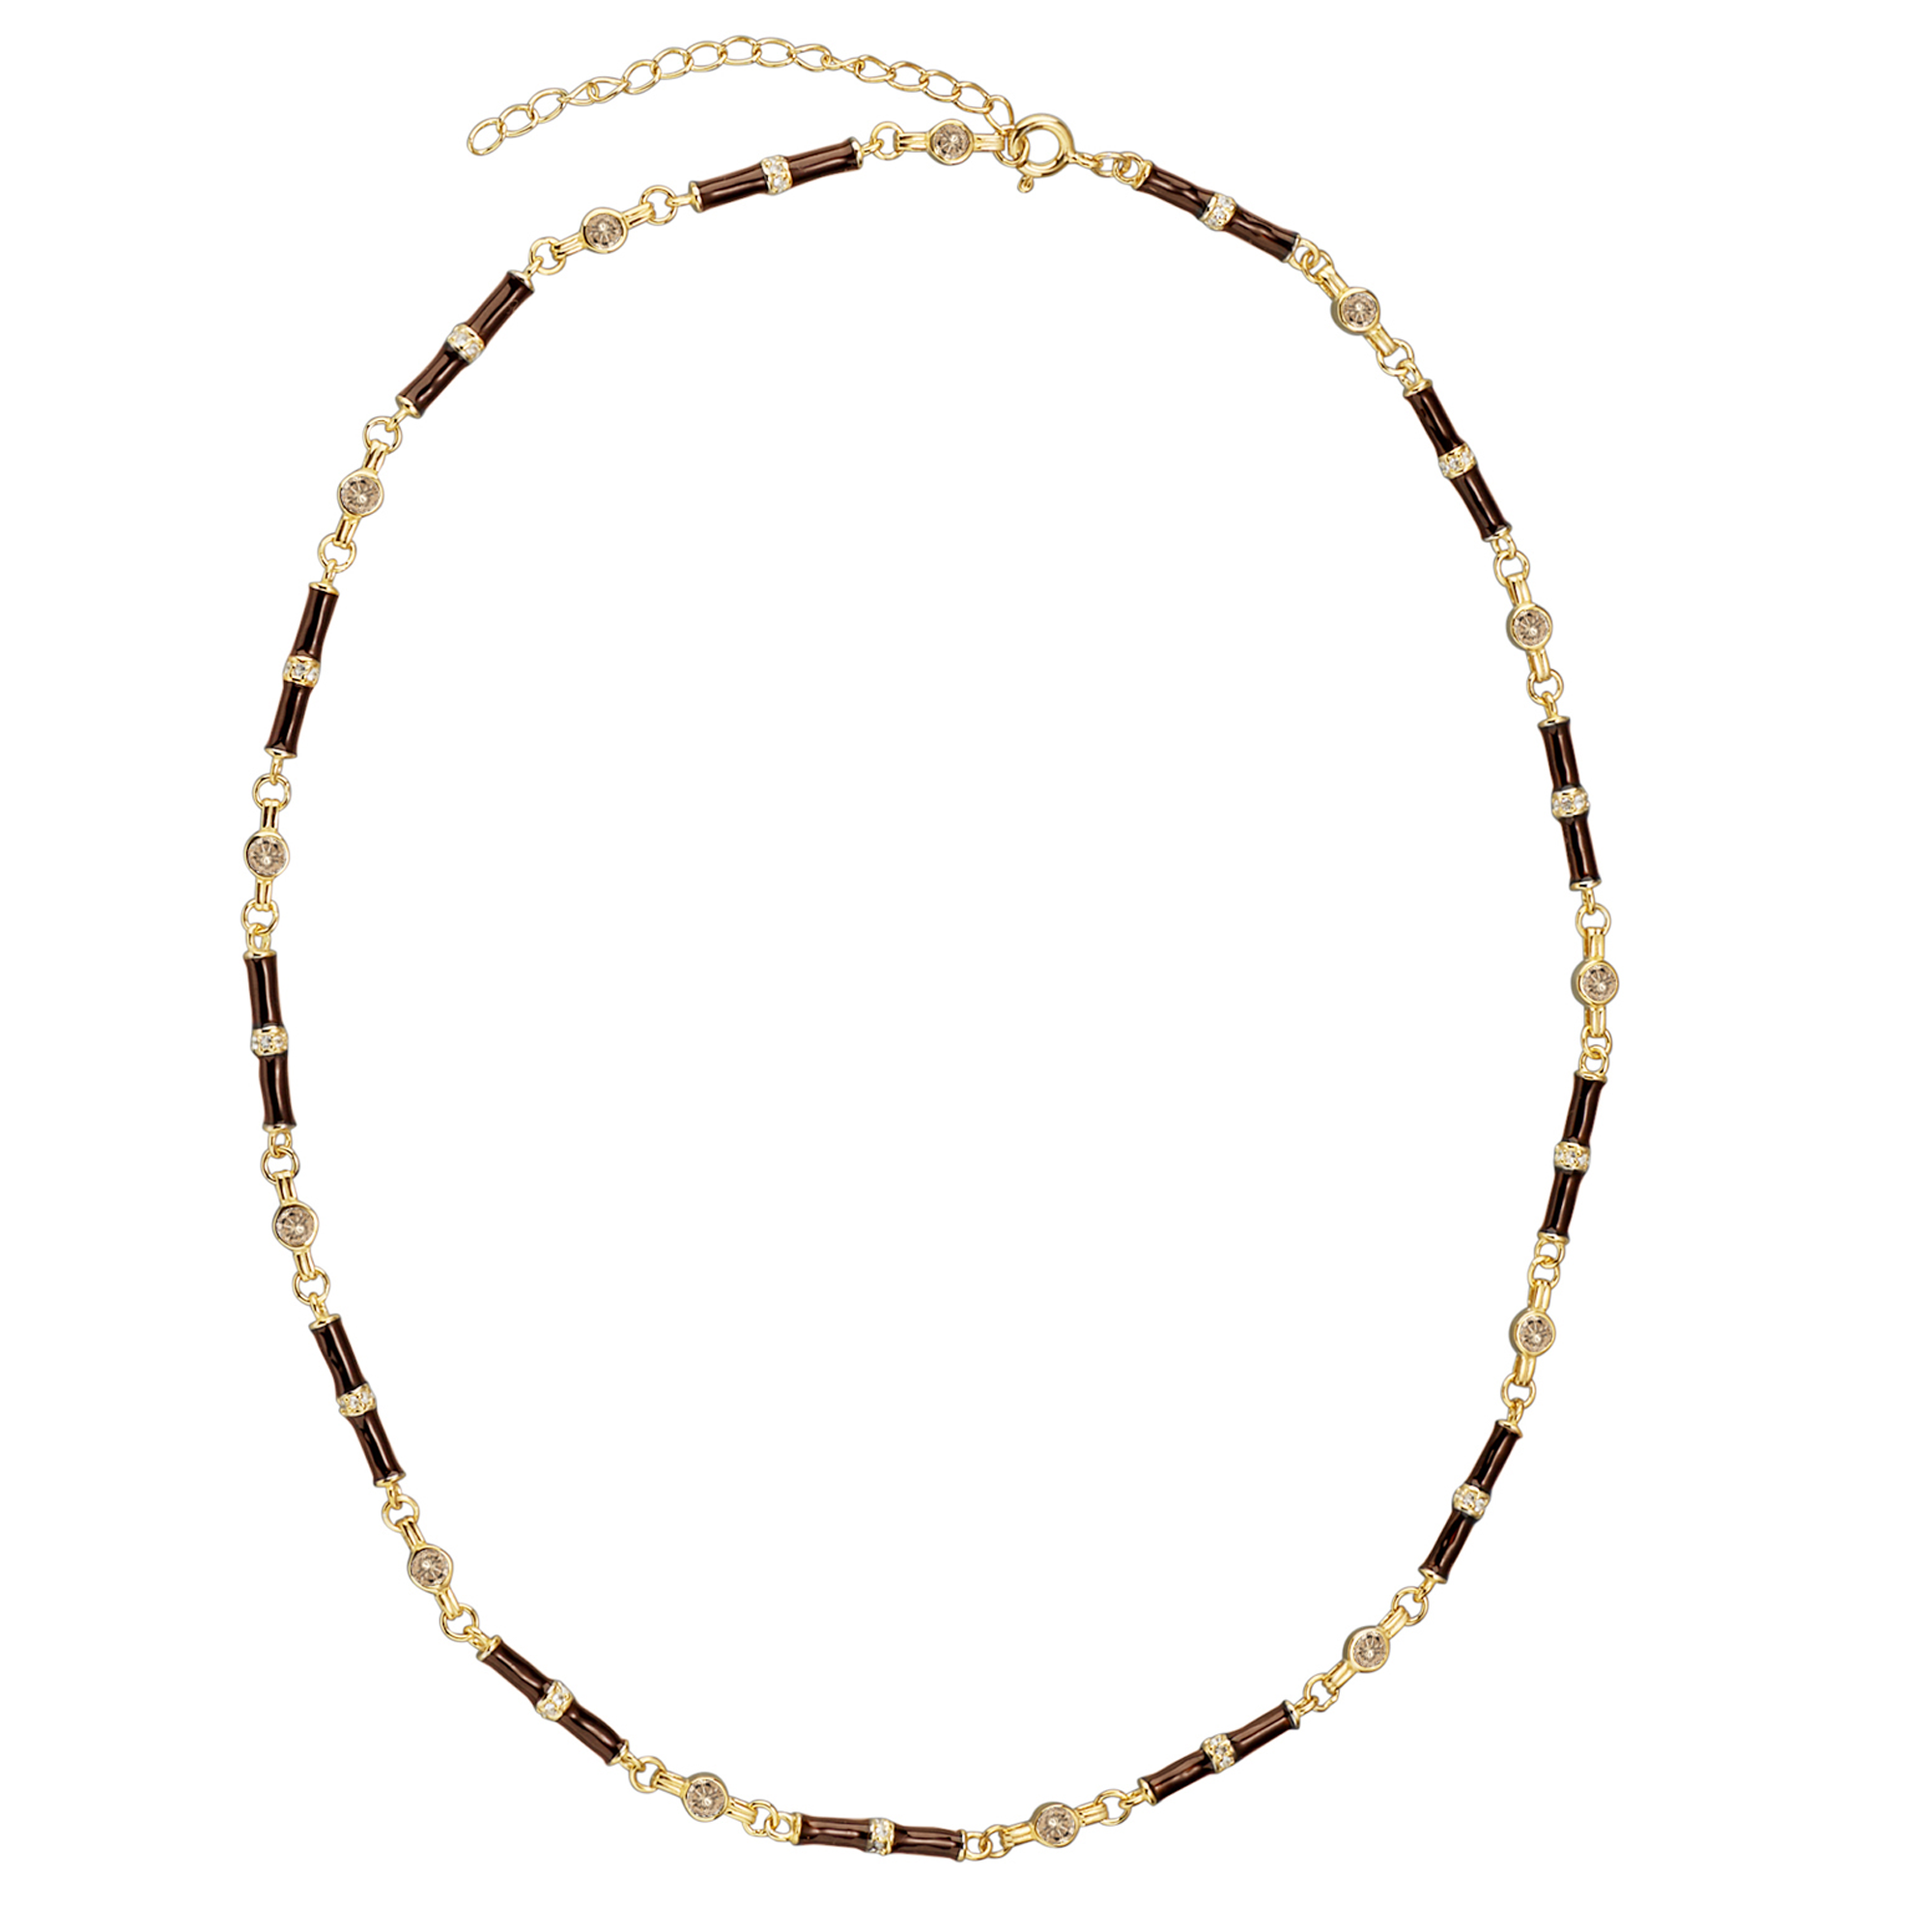 Marlowe Brown Enamel Necklace with Champagne Stone